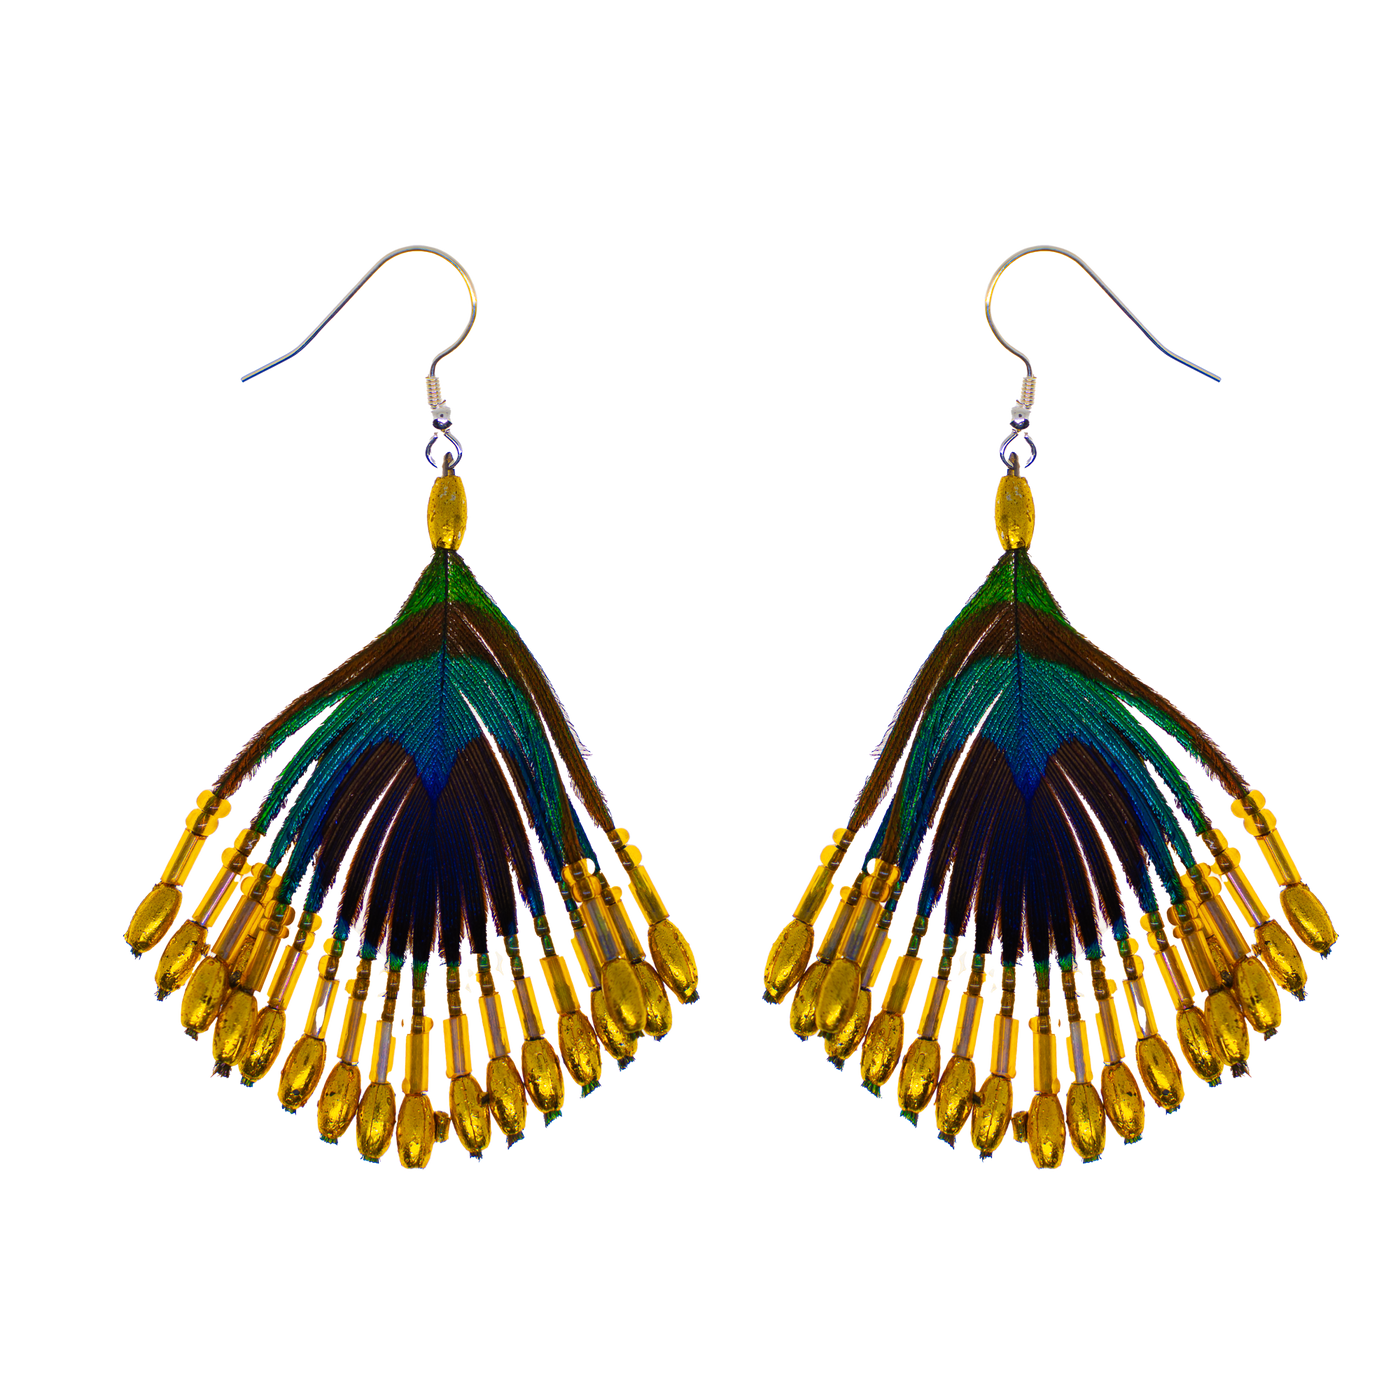 Real Peacock Feather Earrings -  .925 sterling silver